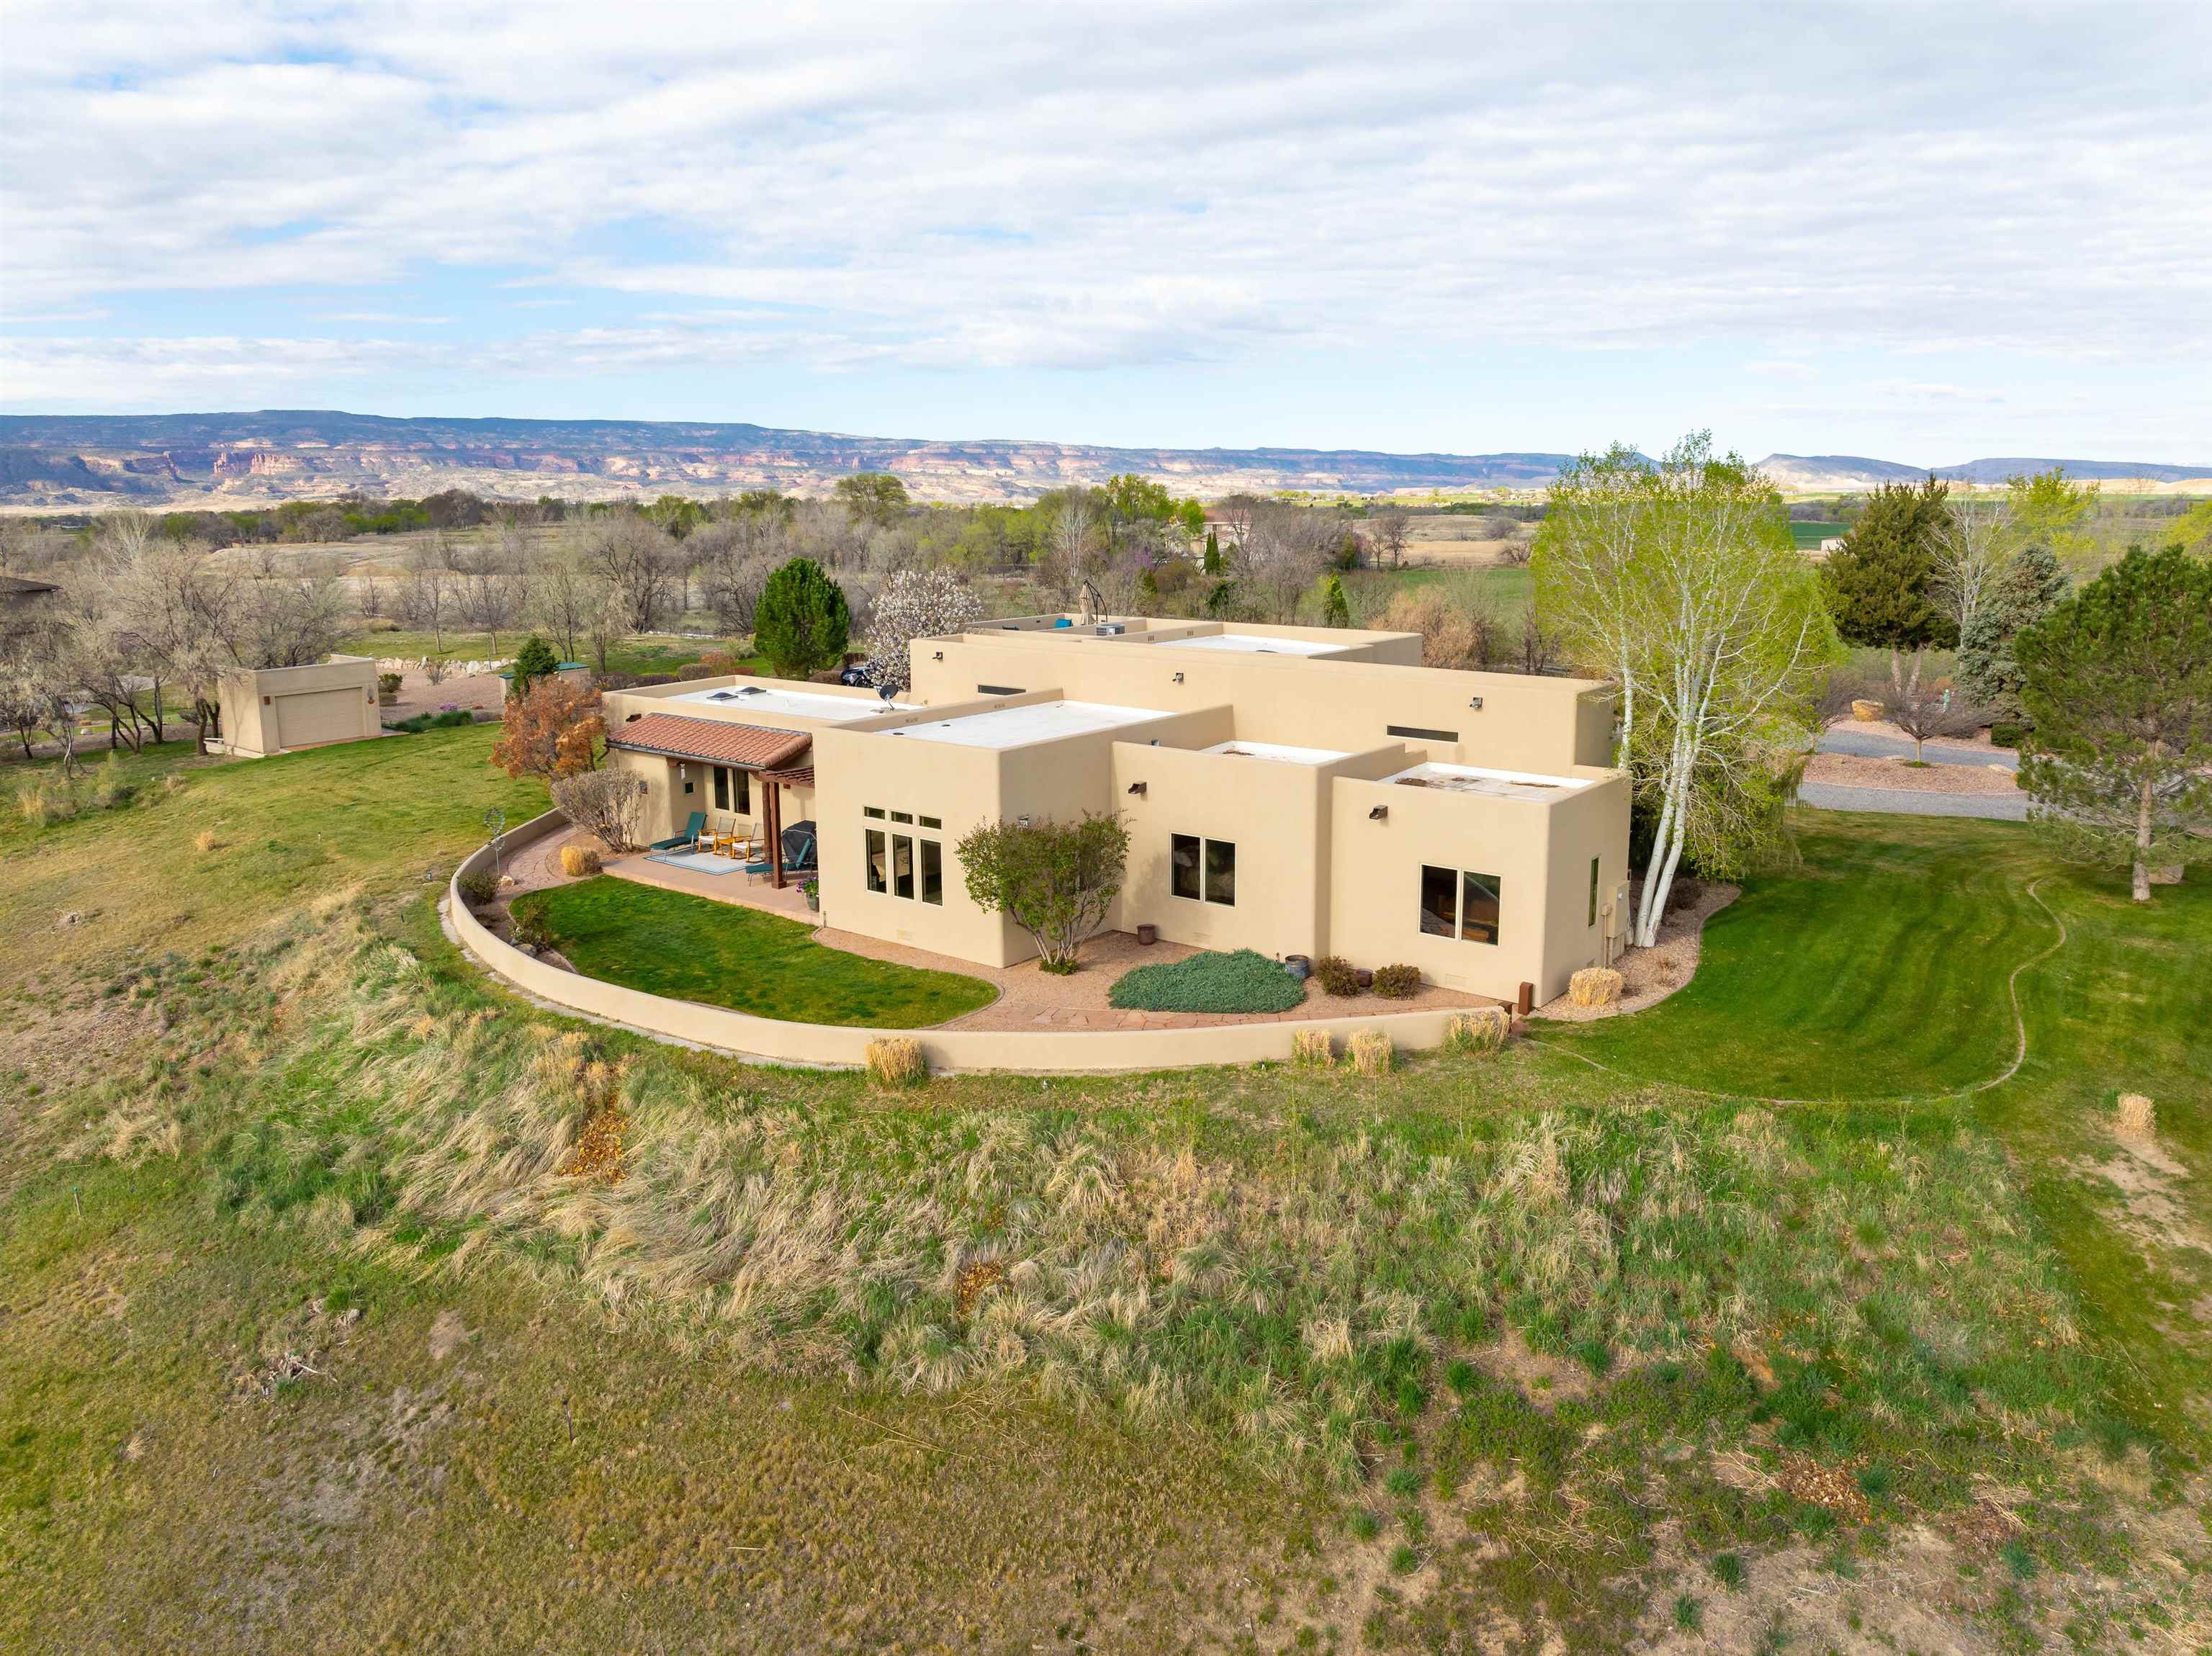 A custom-built Spanish stunner perfectly perched to take in 360-degree Grand Valley views from every window and courtyard.  Quality 2x6 construction and beautiful finishes compliment the interior throughout.  The primary suite has been updated and an additional 882sf bonus room and office area was added in 2018, outside you'll find a freshly painted stucco exterior and a roof top deck that will take your breath away. Words don't do this one justice, book your private showing today!